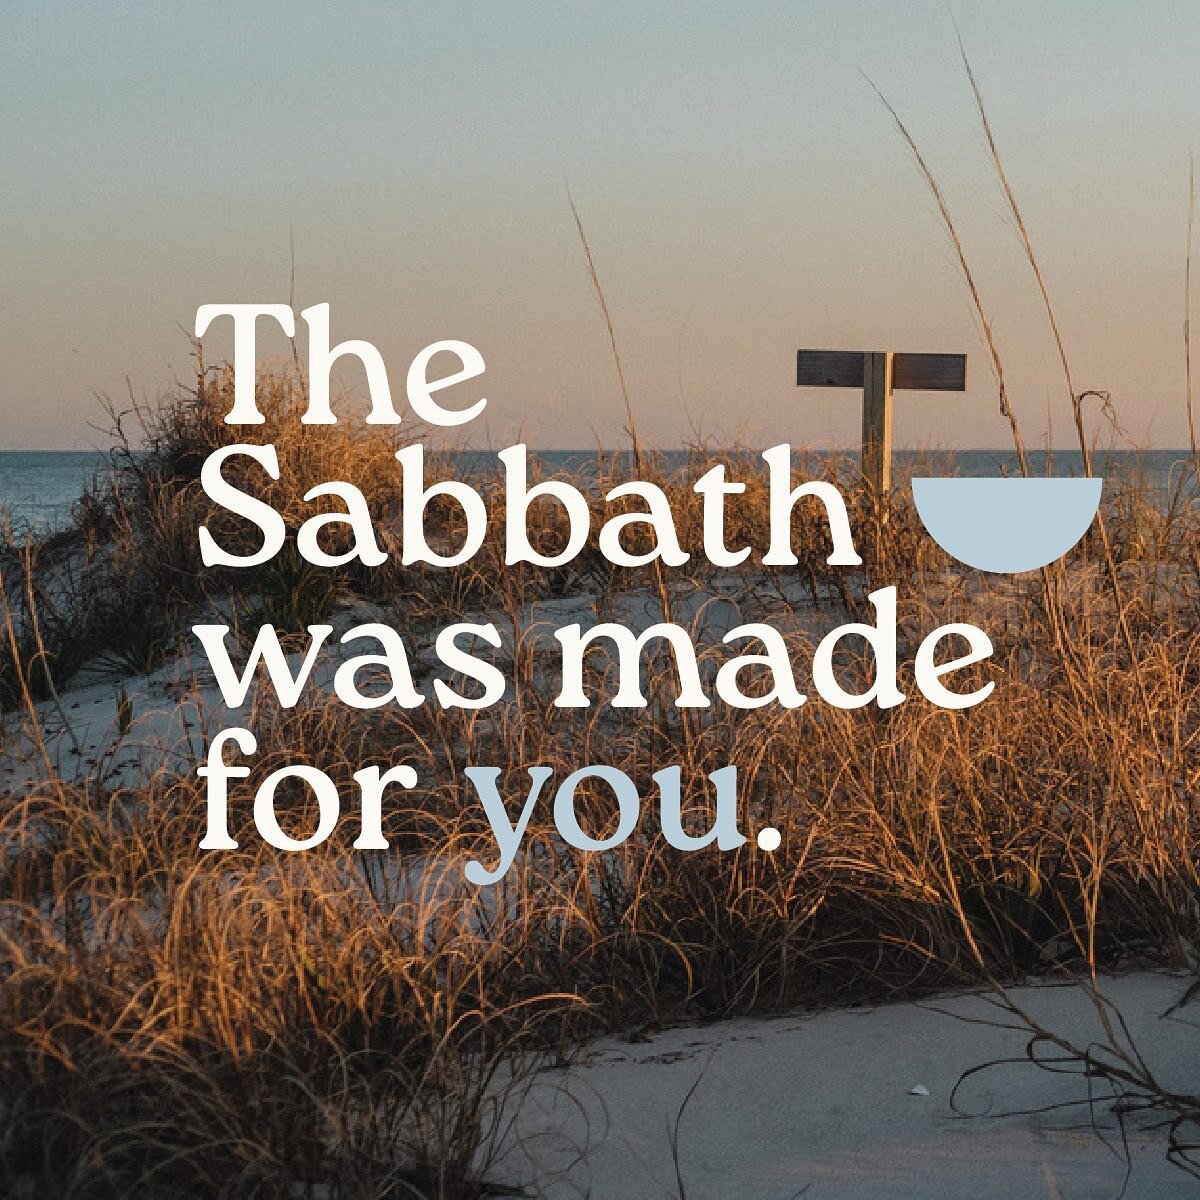 The Sabbath was made for you. 🌾

Swipe to see even more of our limited-edition pottery line: The Sabbath Collection 

&ldquo;The Sabbath was made to meet the needs of people, and not people to meet the requirements of the Sabbath.&rdquo; Mark 2:27, 